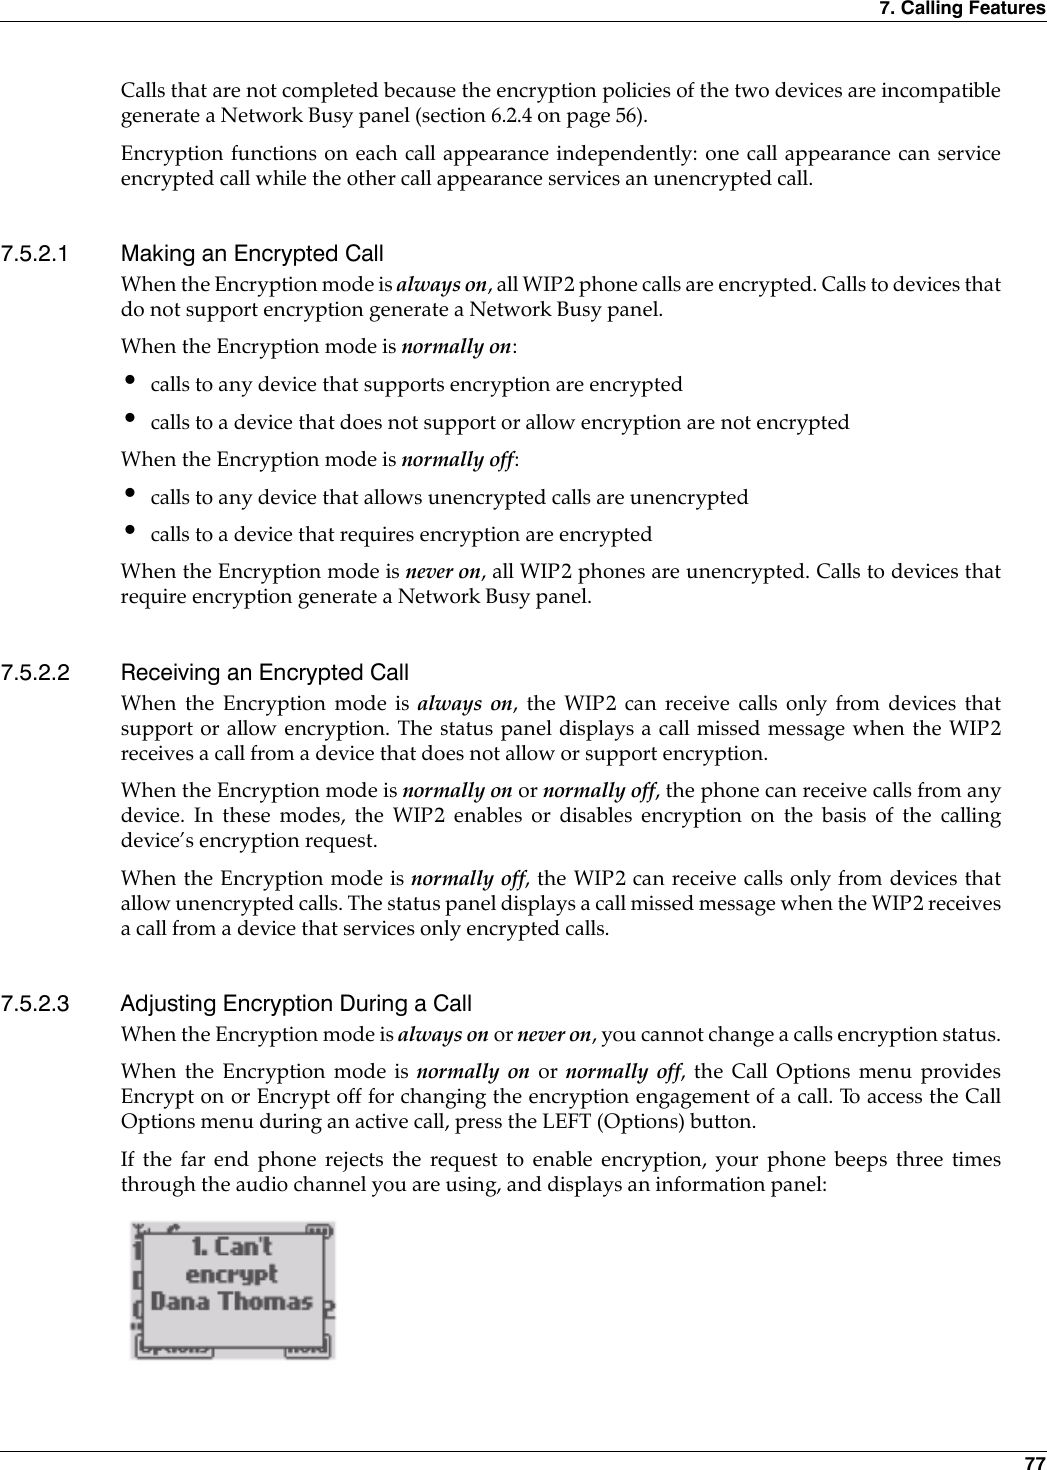 7. Calling Features 77Calls that are not completed because the encryption policies of the two devices are incompatiblegenerate a Network Busy panel (section 6.2.4 on page 56).Encryption functions on each call appearance independently: one call appearance can serviceencrypted call while the other call appearance services an unencrypted call.7.5.2.1 Making an Encrypted CallWhen the Encryption mode is always on, all WIP2 phone calls are encrypted. Calls to devices thatdo not support encryption generate a Network Busy panel.When the Encryption mode is normally on:•calls to any device that supports encryption are encrypted•calls to a device that does not support or allow encryption are not encryptedWhen the Encryption mode is normally off:•calls to any device that allows unencrypted calls are unencrypted•calls to a device that requires encryption are encryptedWhen the Encryption mode is never on, all WIP2 phones are unencrypted. Calls to devices thatrequire encryption generate a Network Busy panel.7.5.2.2 Receiving an Encrypted CallWhen the Encryption mode is always on, the WIP2 can receive calls only from devices thatsupport or allow encryption. The status panel displays a call missed message when the WIP2receives a call from a device that does not allow or support encryption.When the Encryption mode is normally on or normally off, the phone can receive calls from anydevice. In these modes, the WIP2 enables or disables encryption on the basis of the callingdevice’s encryption request.When the Encryption mode is normally off, the WIP2 can receive calls only from devices thatallow unencrypted calls. The status panel displays a call missed message when the WIP2 receivesa call from a device that services only encrypted calls.7.5.2.3 Adjusting Encryption During a CallWhen the Encryption mode is always on or never on, you cannot change a calls encryption status.When the Encryption mode is normally on or normally off, the Call Options menu providesEncrypt on or Encrypt off for changing the encryption engagement of a call. To access the CallOptions menu during an active call, press the LEFT (Options) button.If the far end phone rejects the request to enable encryption, your phone beeps three timesthrough the audio channel you are using, and displays an information panel: